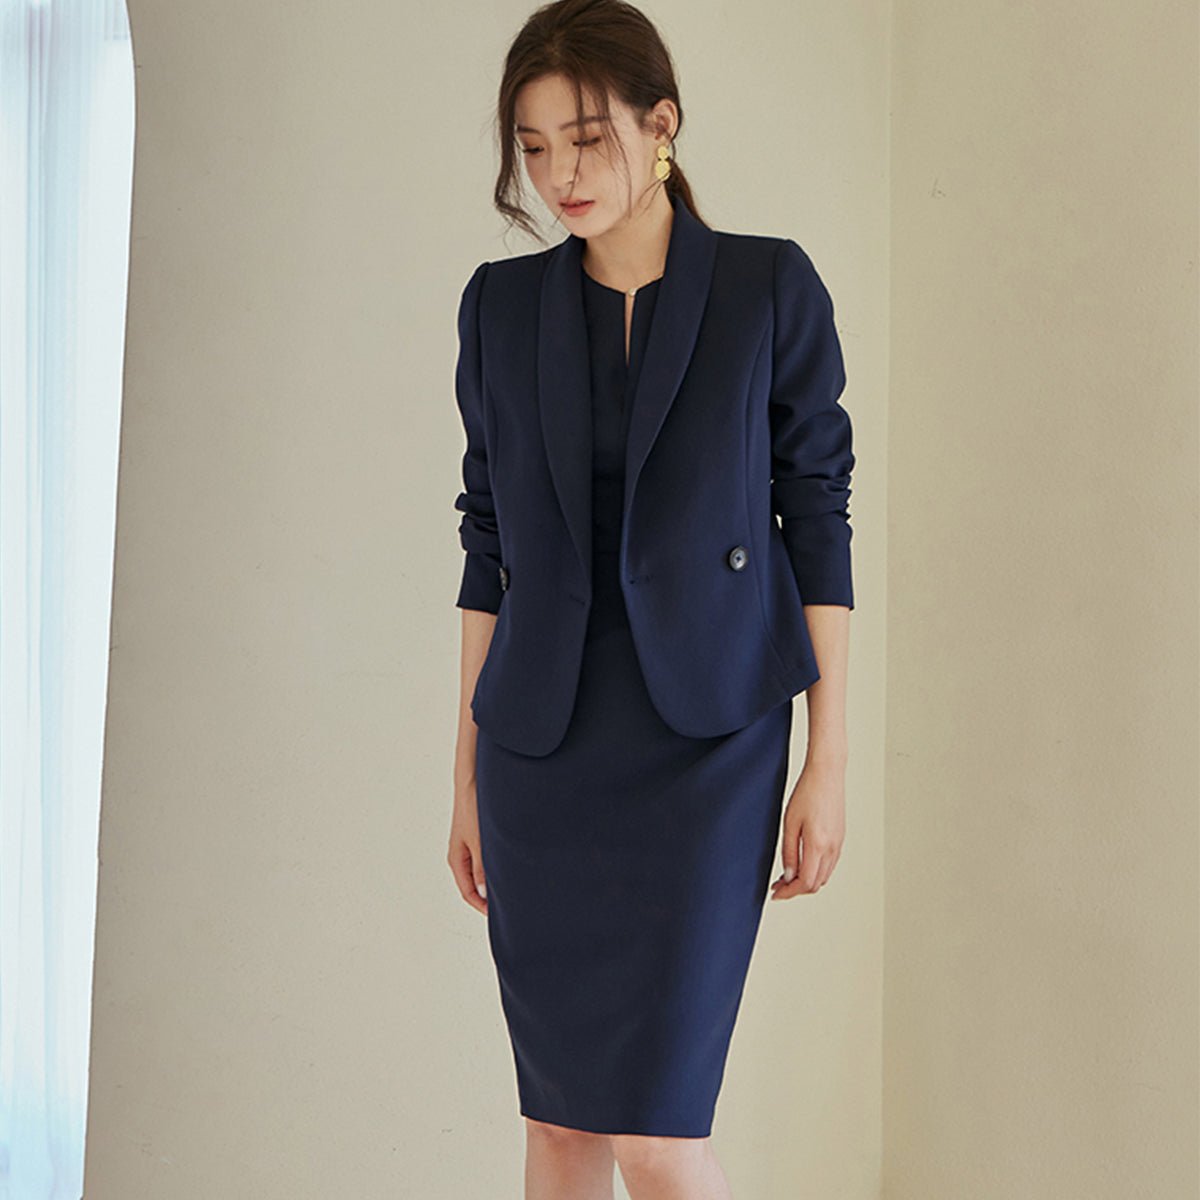 Navy Double-Breasted Blazer and Pencil Skirt Set